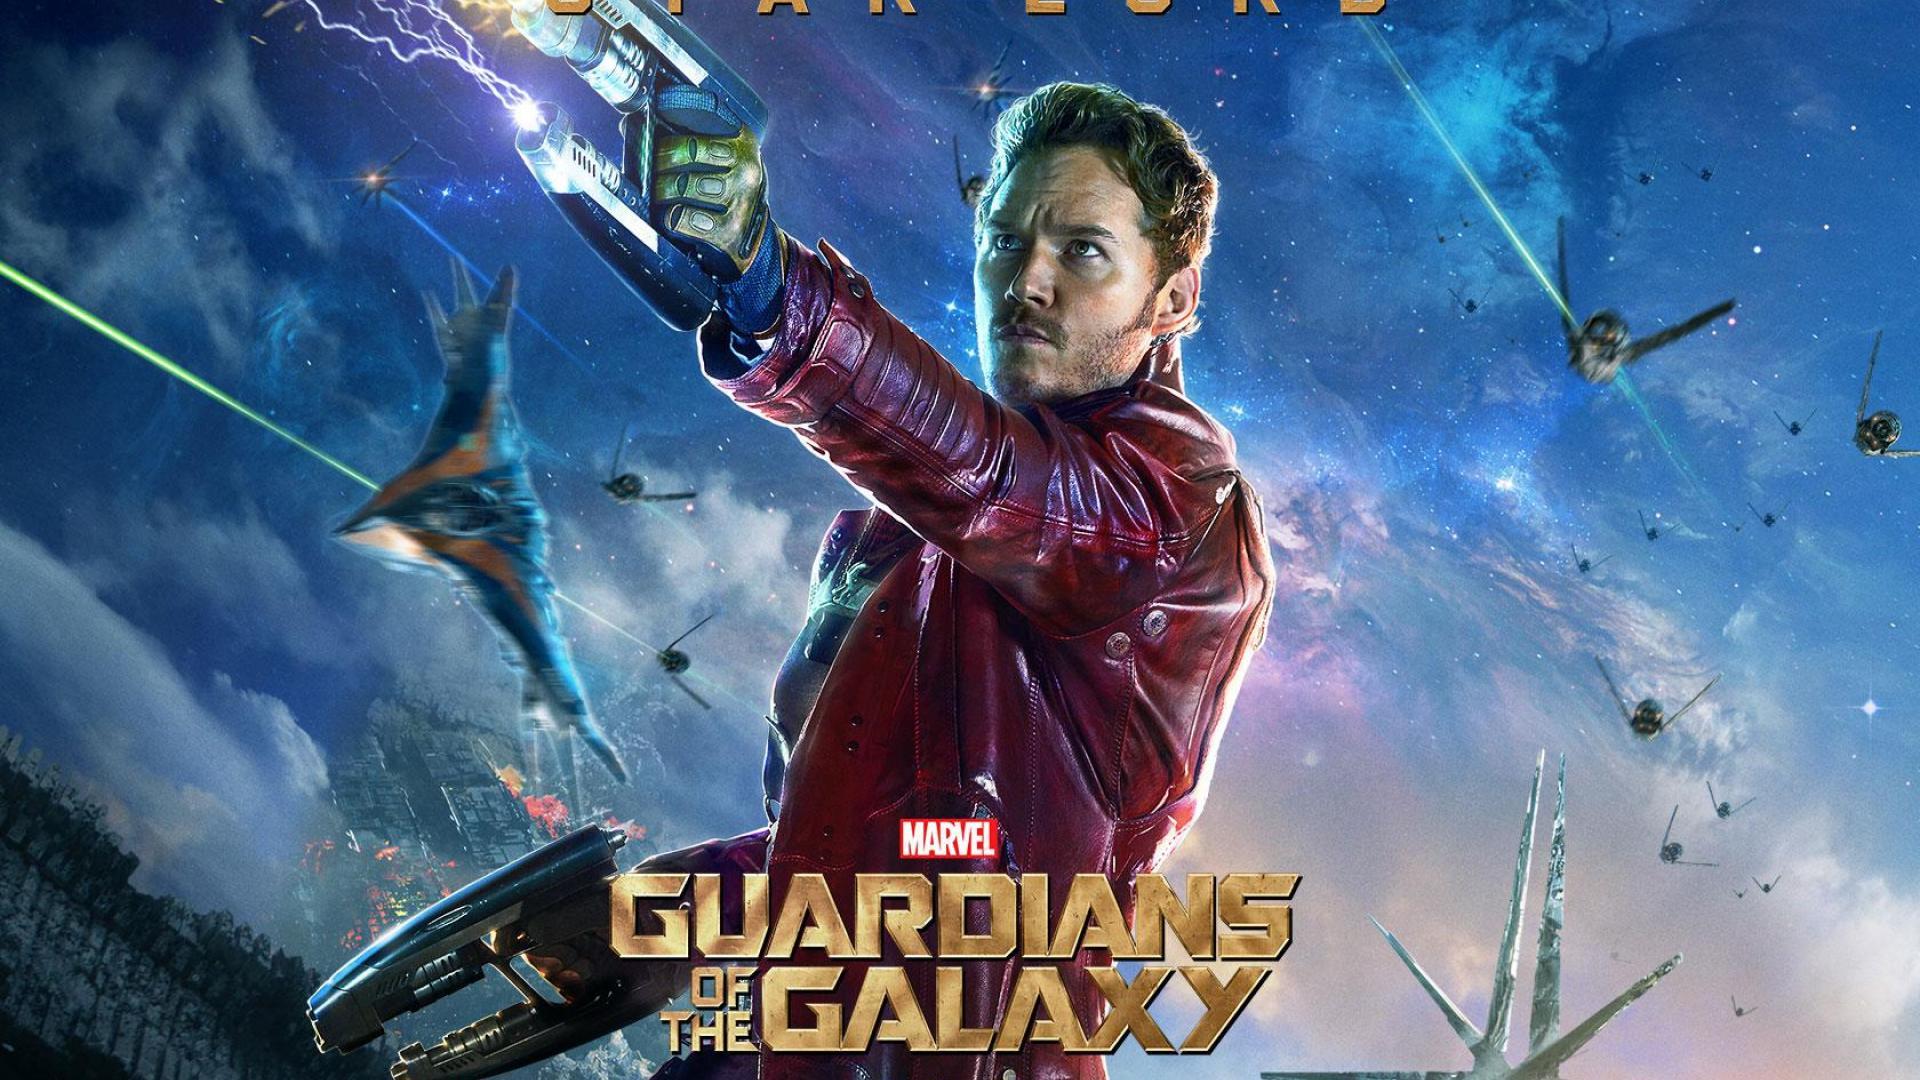 MarvelвЂ™s Guardians of the Galaxy Star Lord Wallpapers